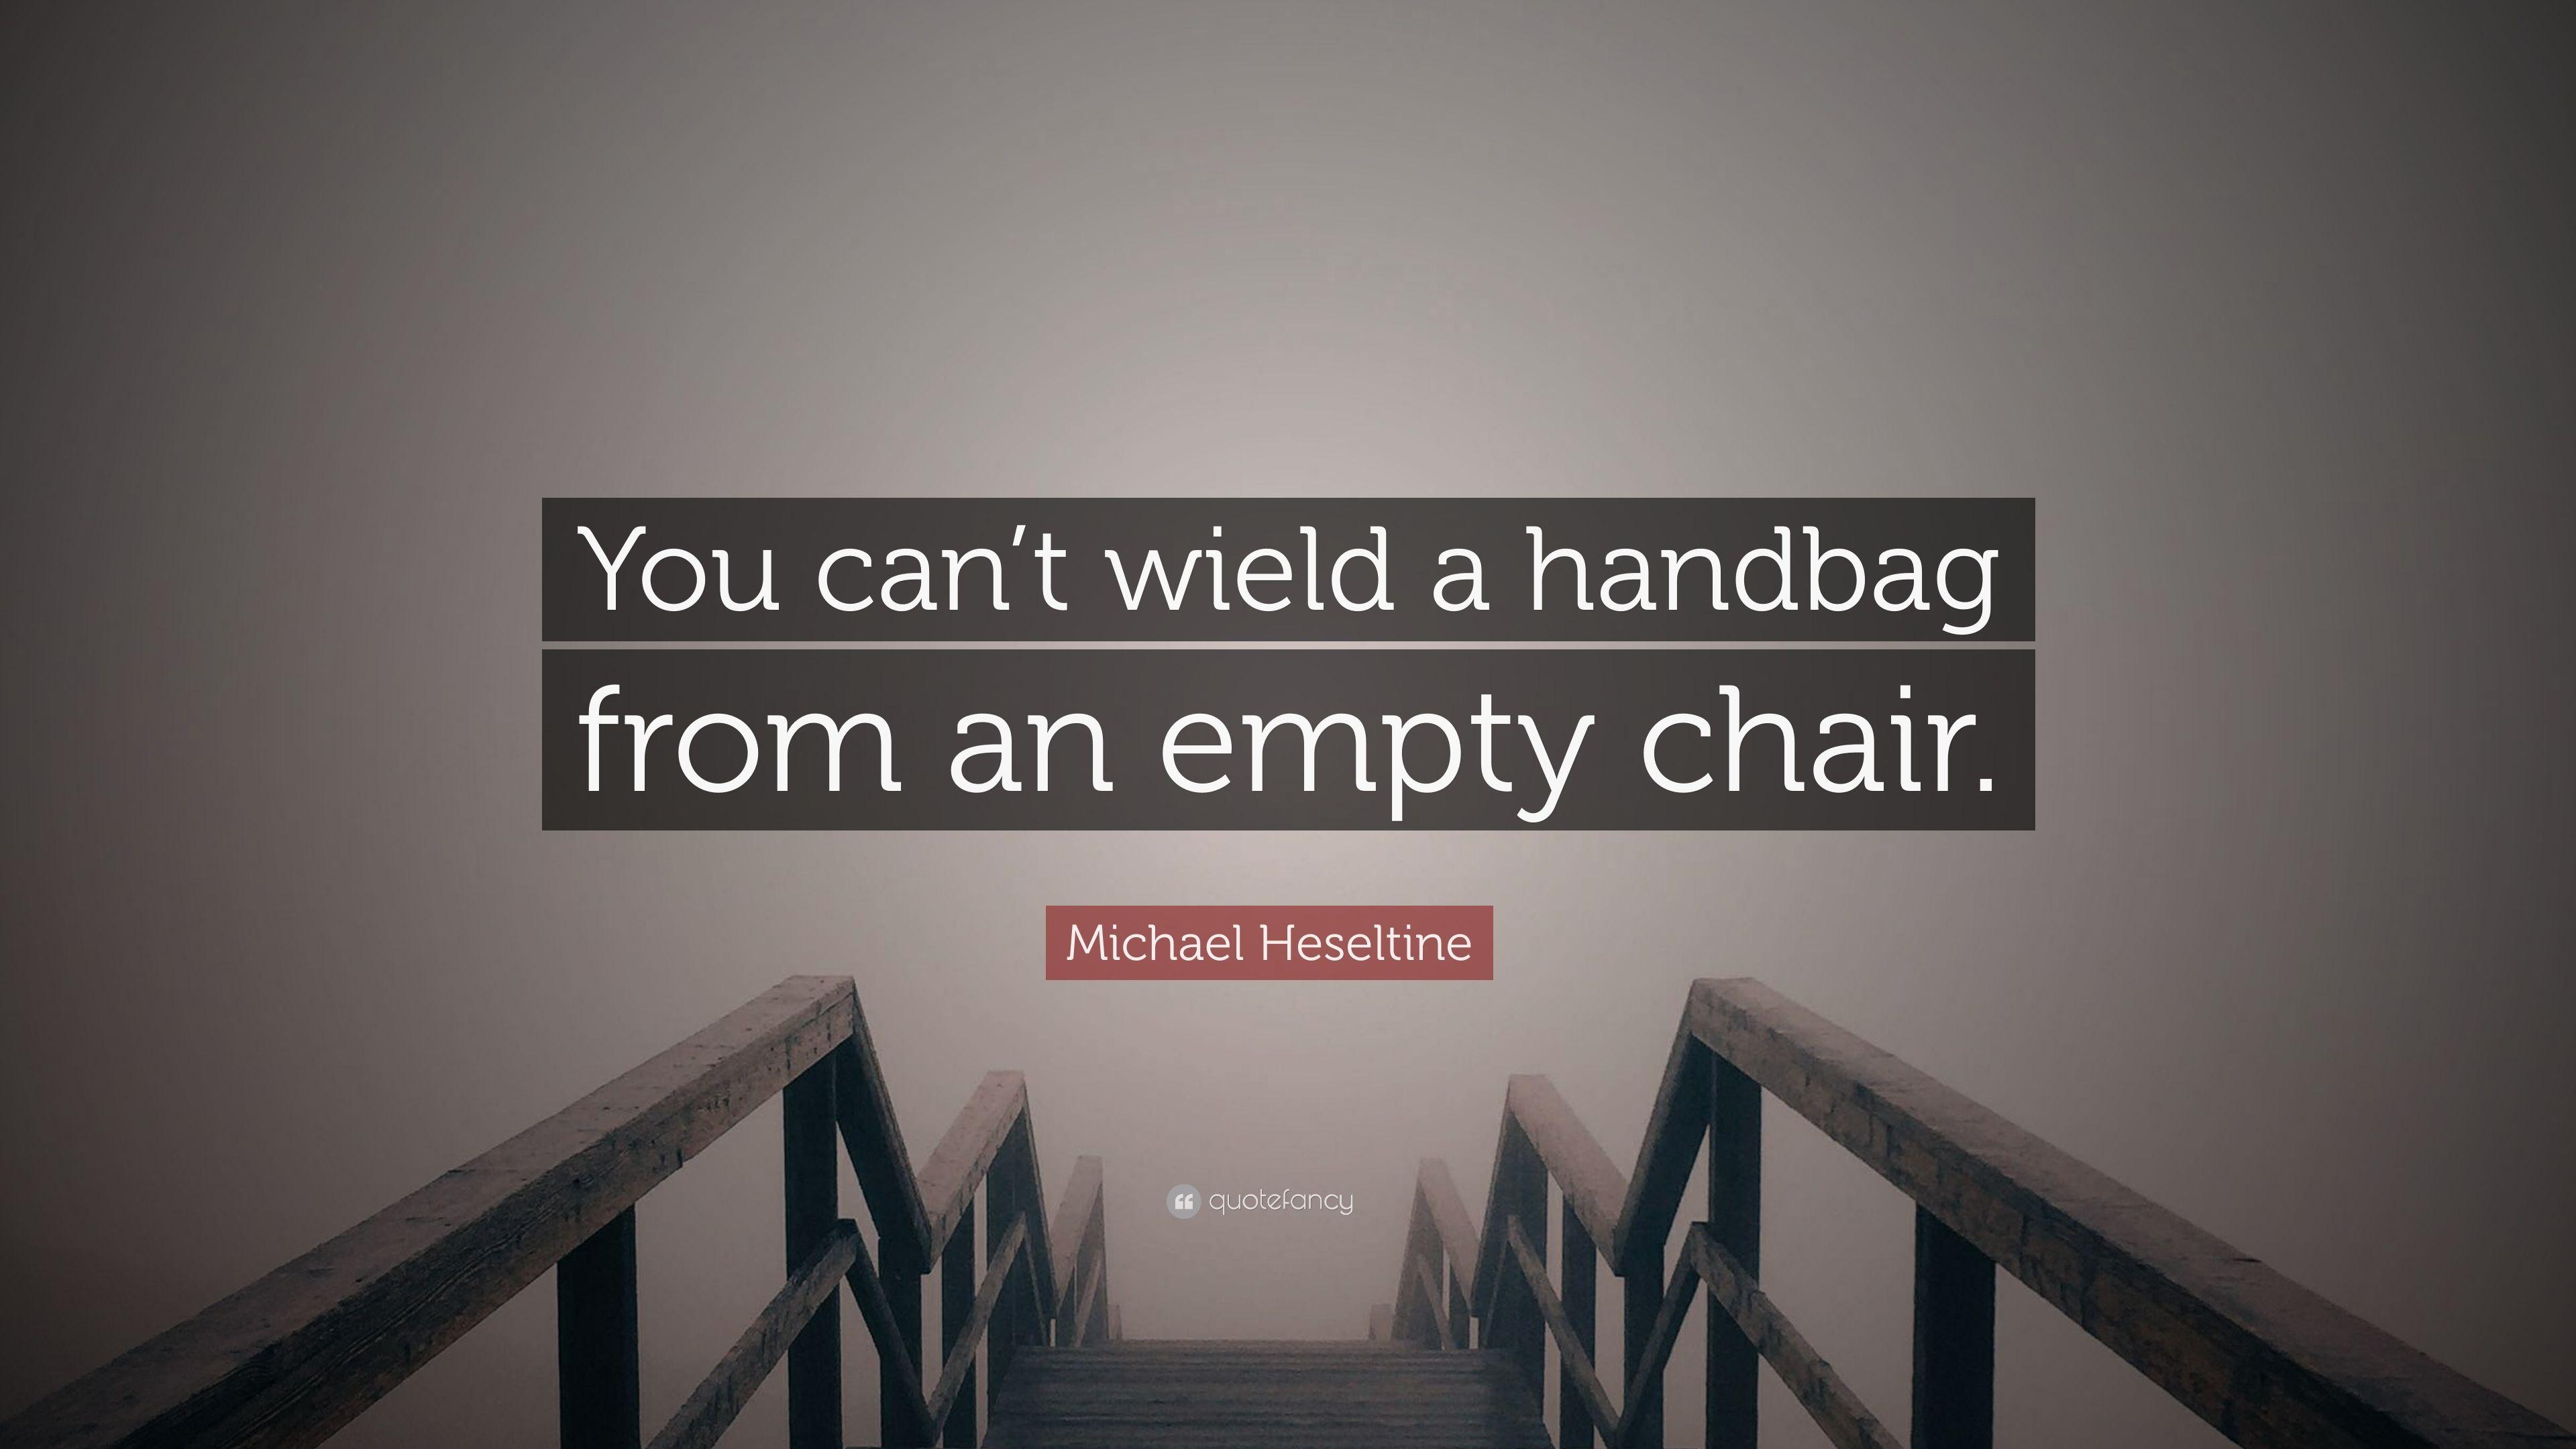 Michael Heseltine Quote: “You can't wield a handbag from an empty